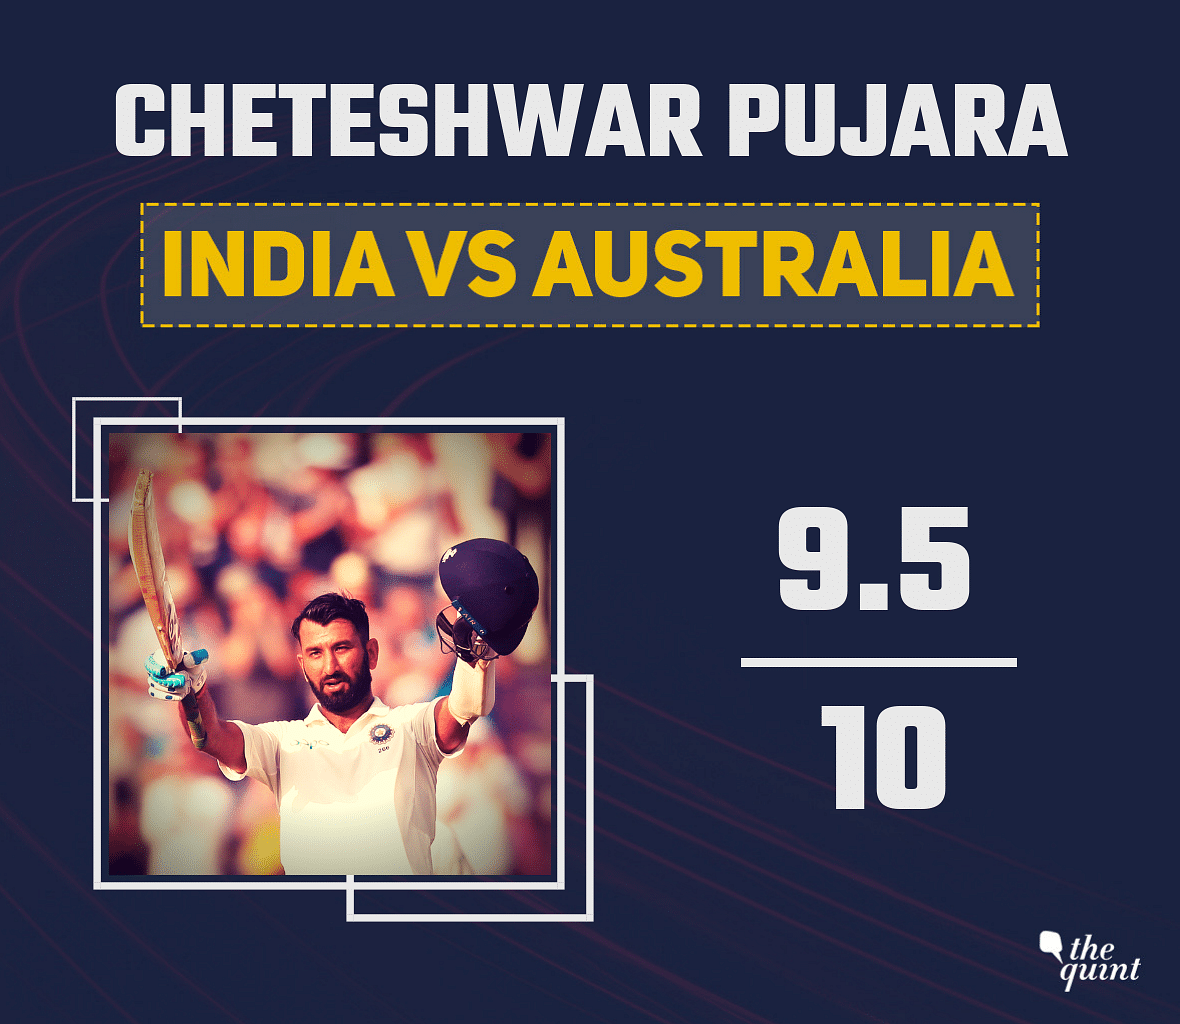 A report card of the Indian team members who won a historic first-ever Test series in Australia.